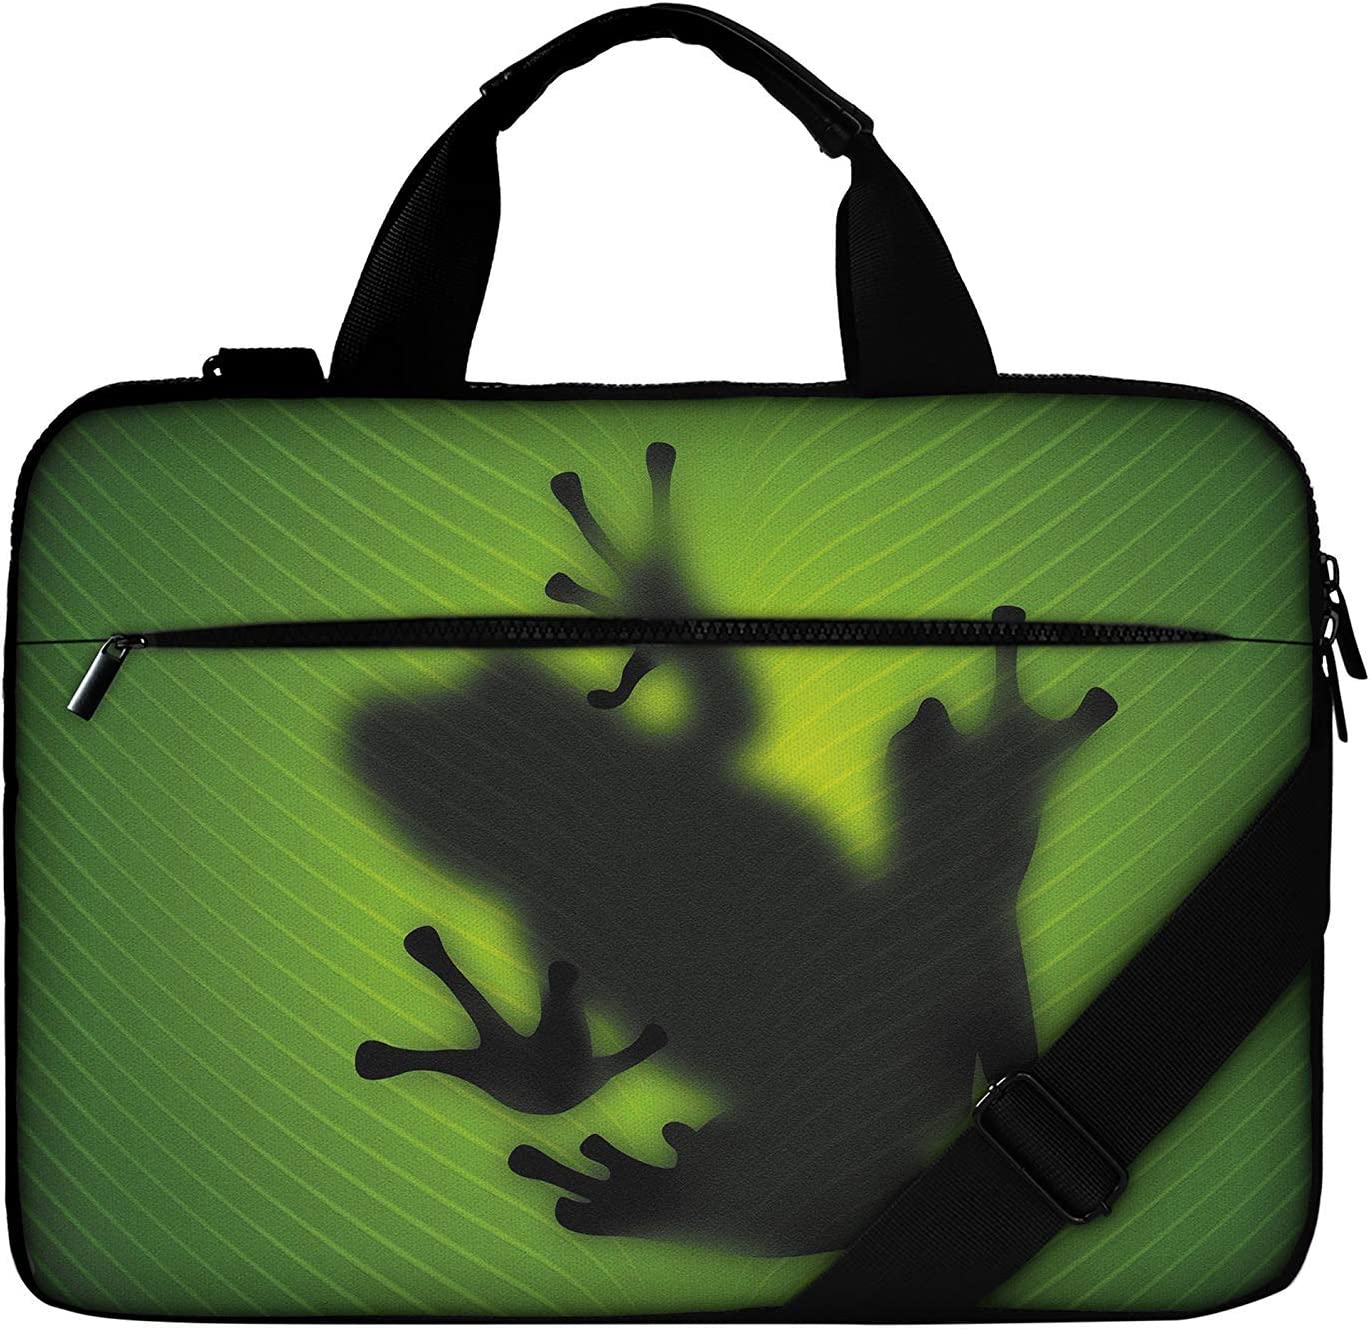 17" - 17,3" inch Laptop bag case made of Canvas with pocket for accessories *GreenFrog"